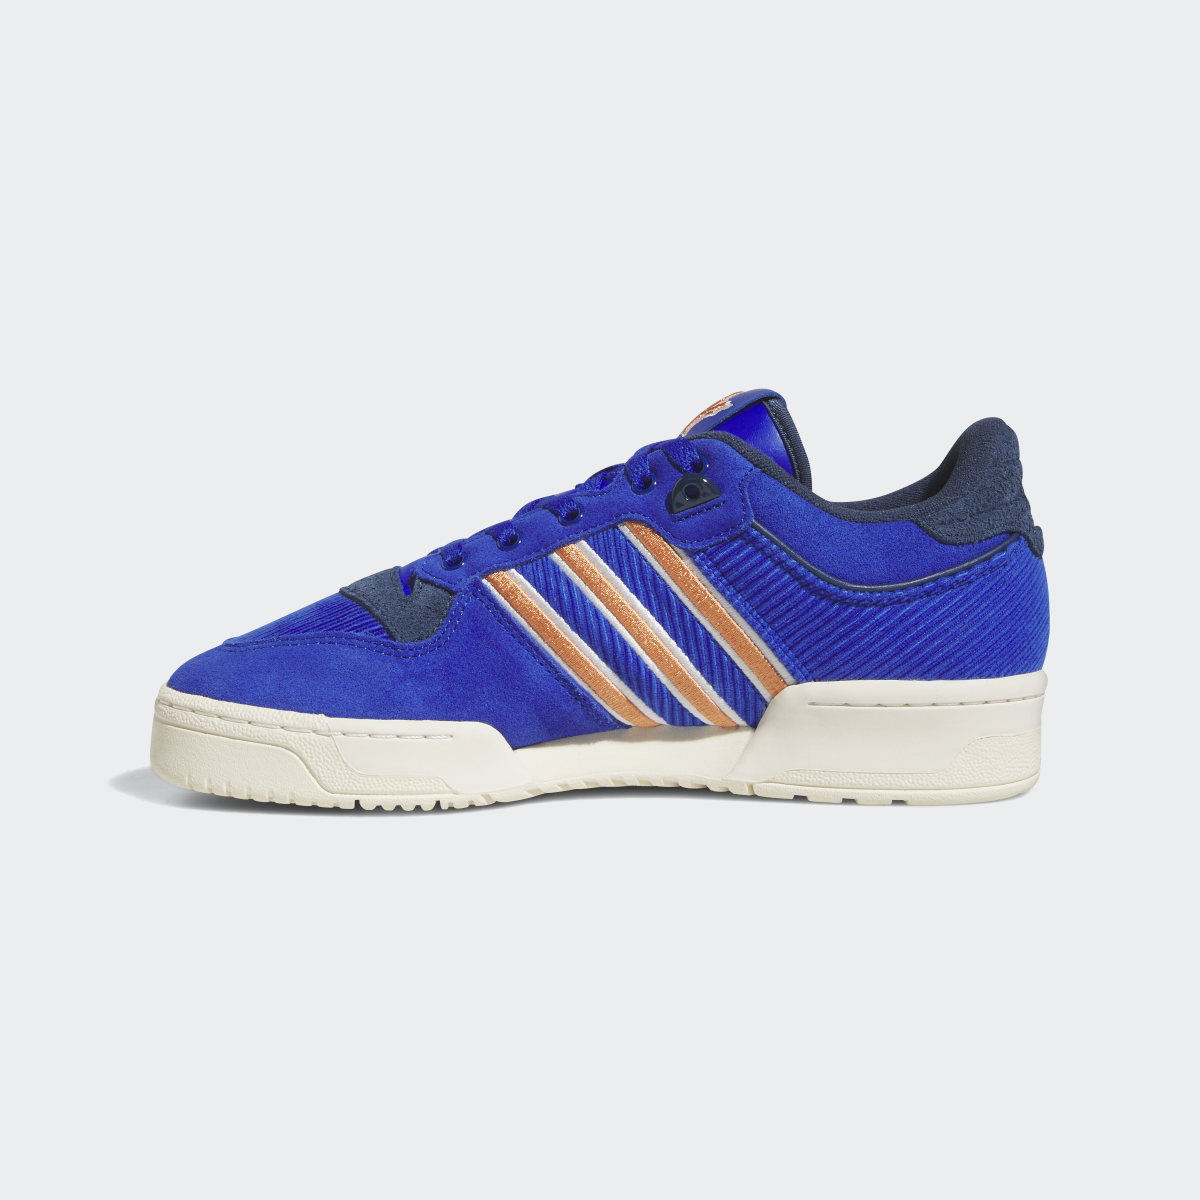 Adidas Rivalry Low 86 Shoes. 8